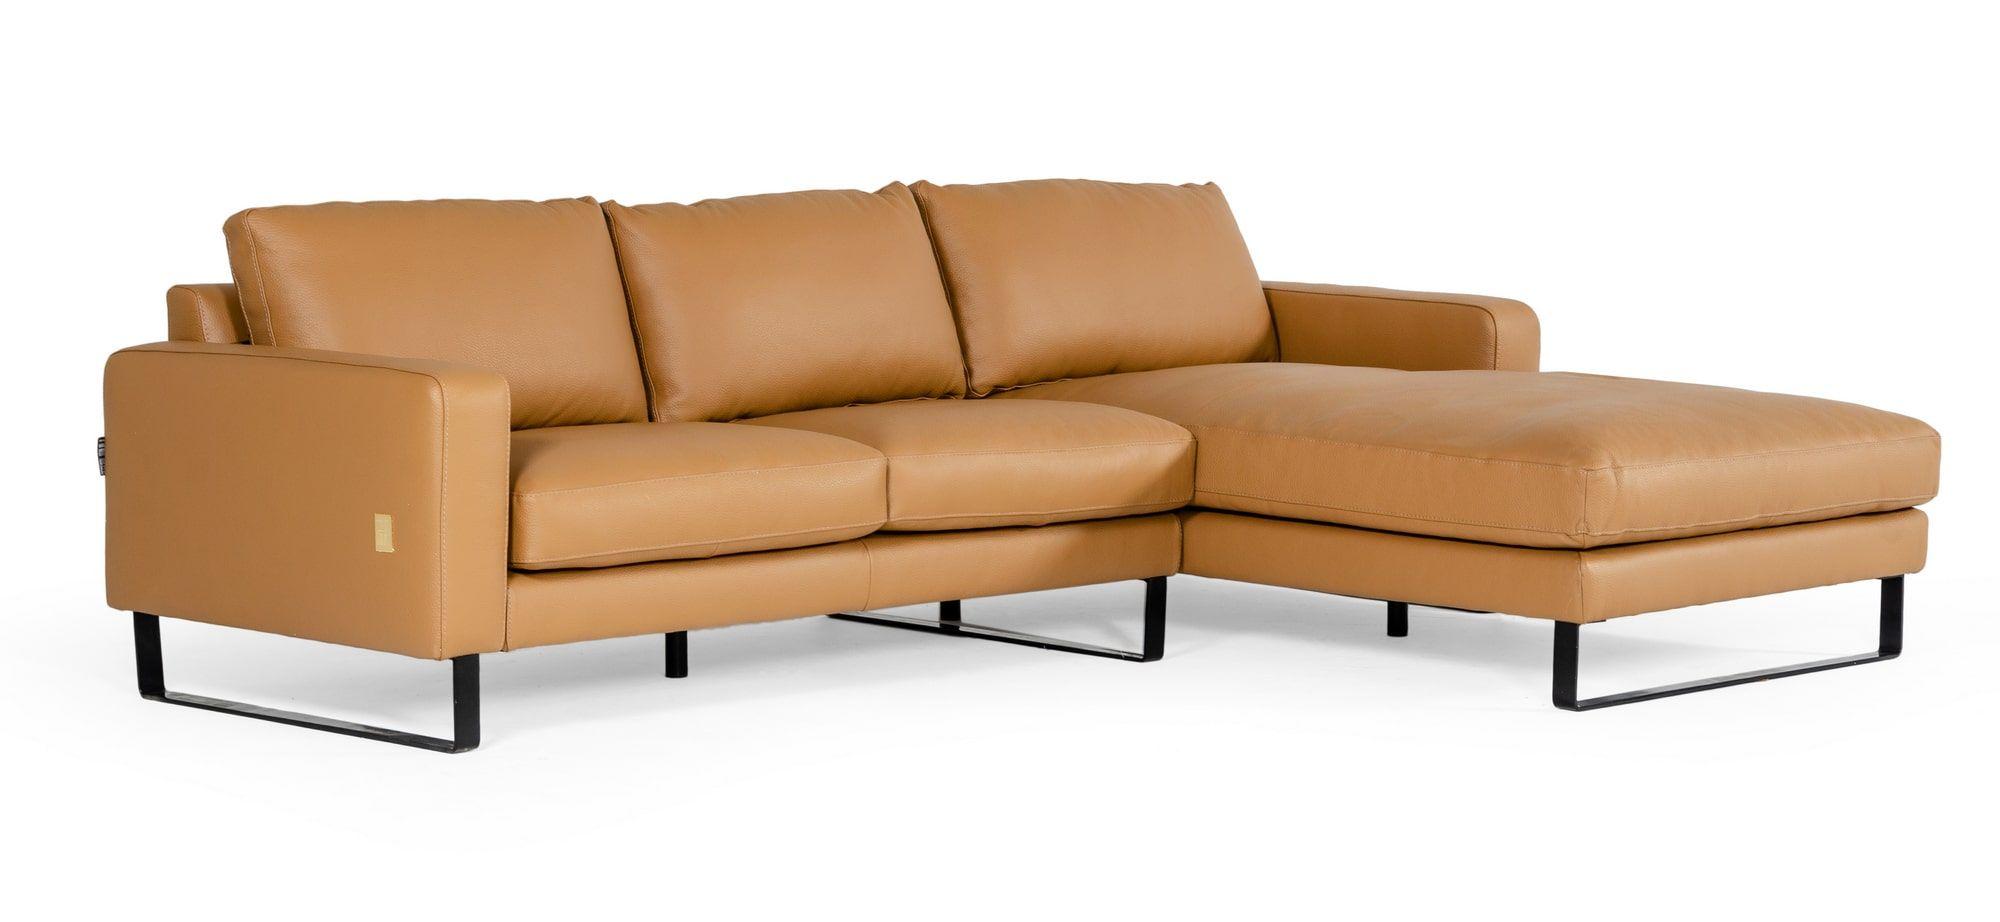 Contemporary, Modern Sectional Sofa VGDDSHINE VGDDSHINE in Cognac Italian Leather